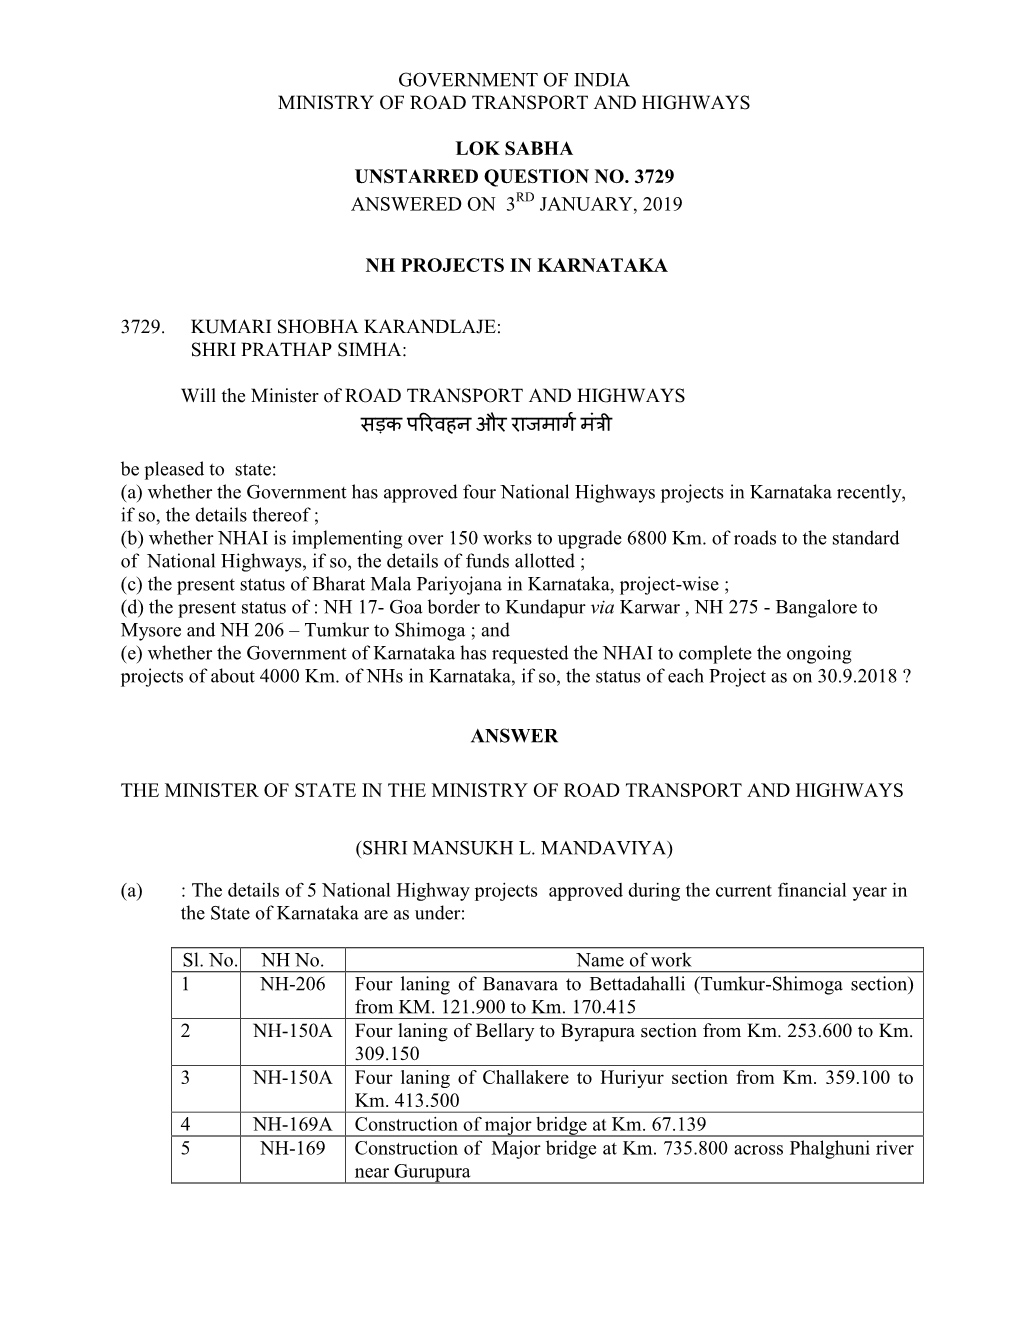 Government of India Ministry of Road Transport and Highways Lok Sabha Unstarred Question No. 3729 Answered on 3 January, 2019 N